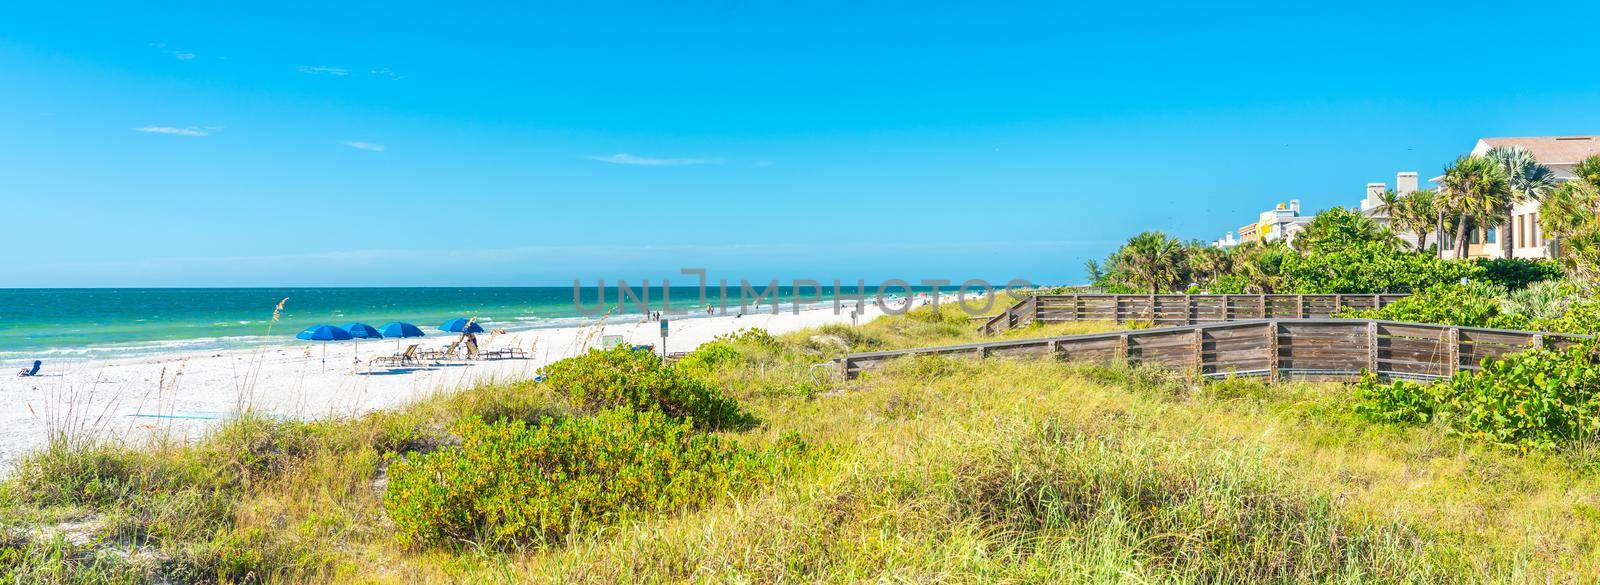 Indian rocks beach with green grass in Florida, USA by Mariakray